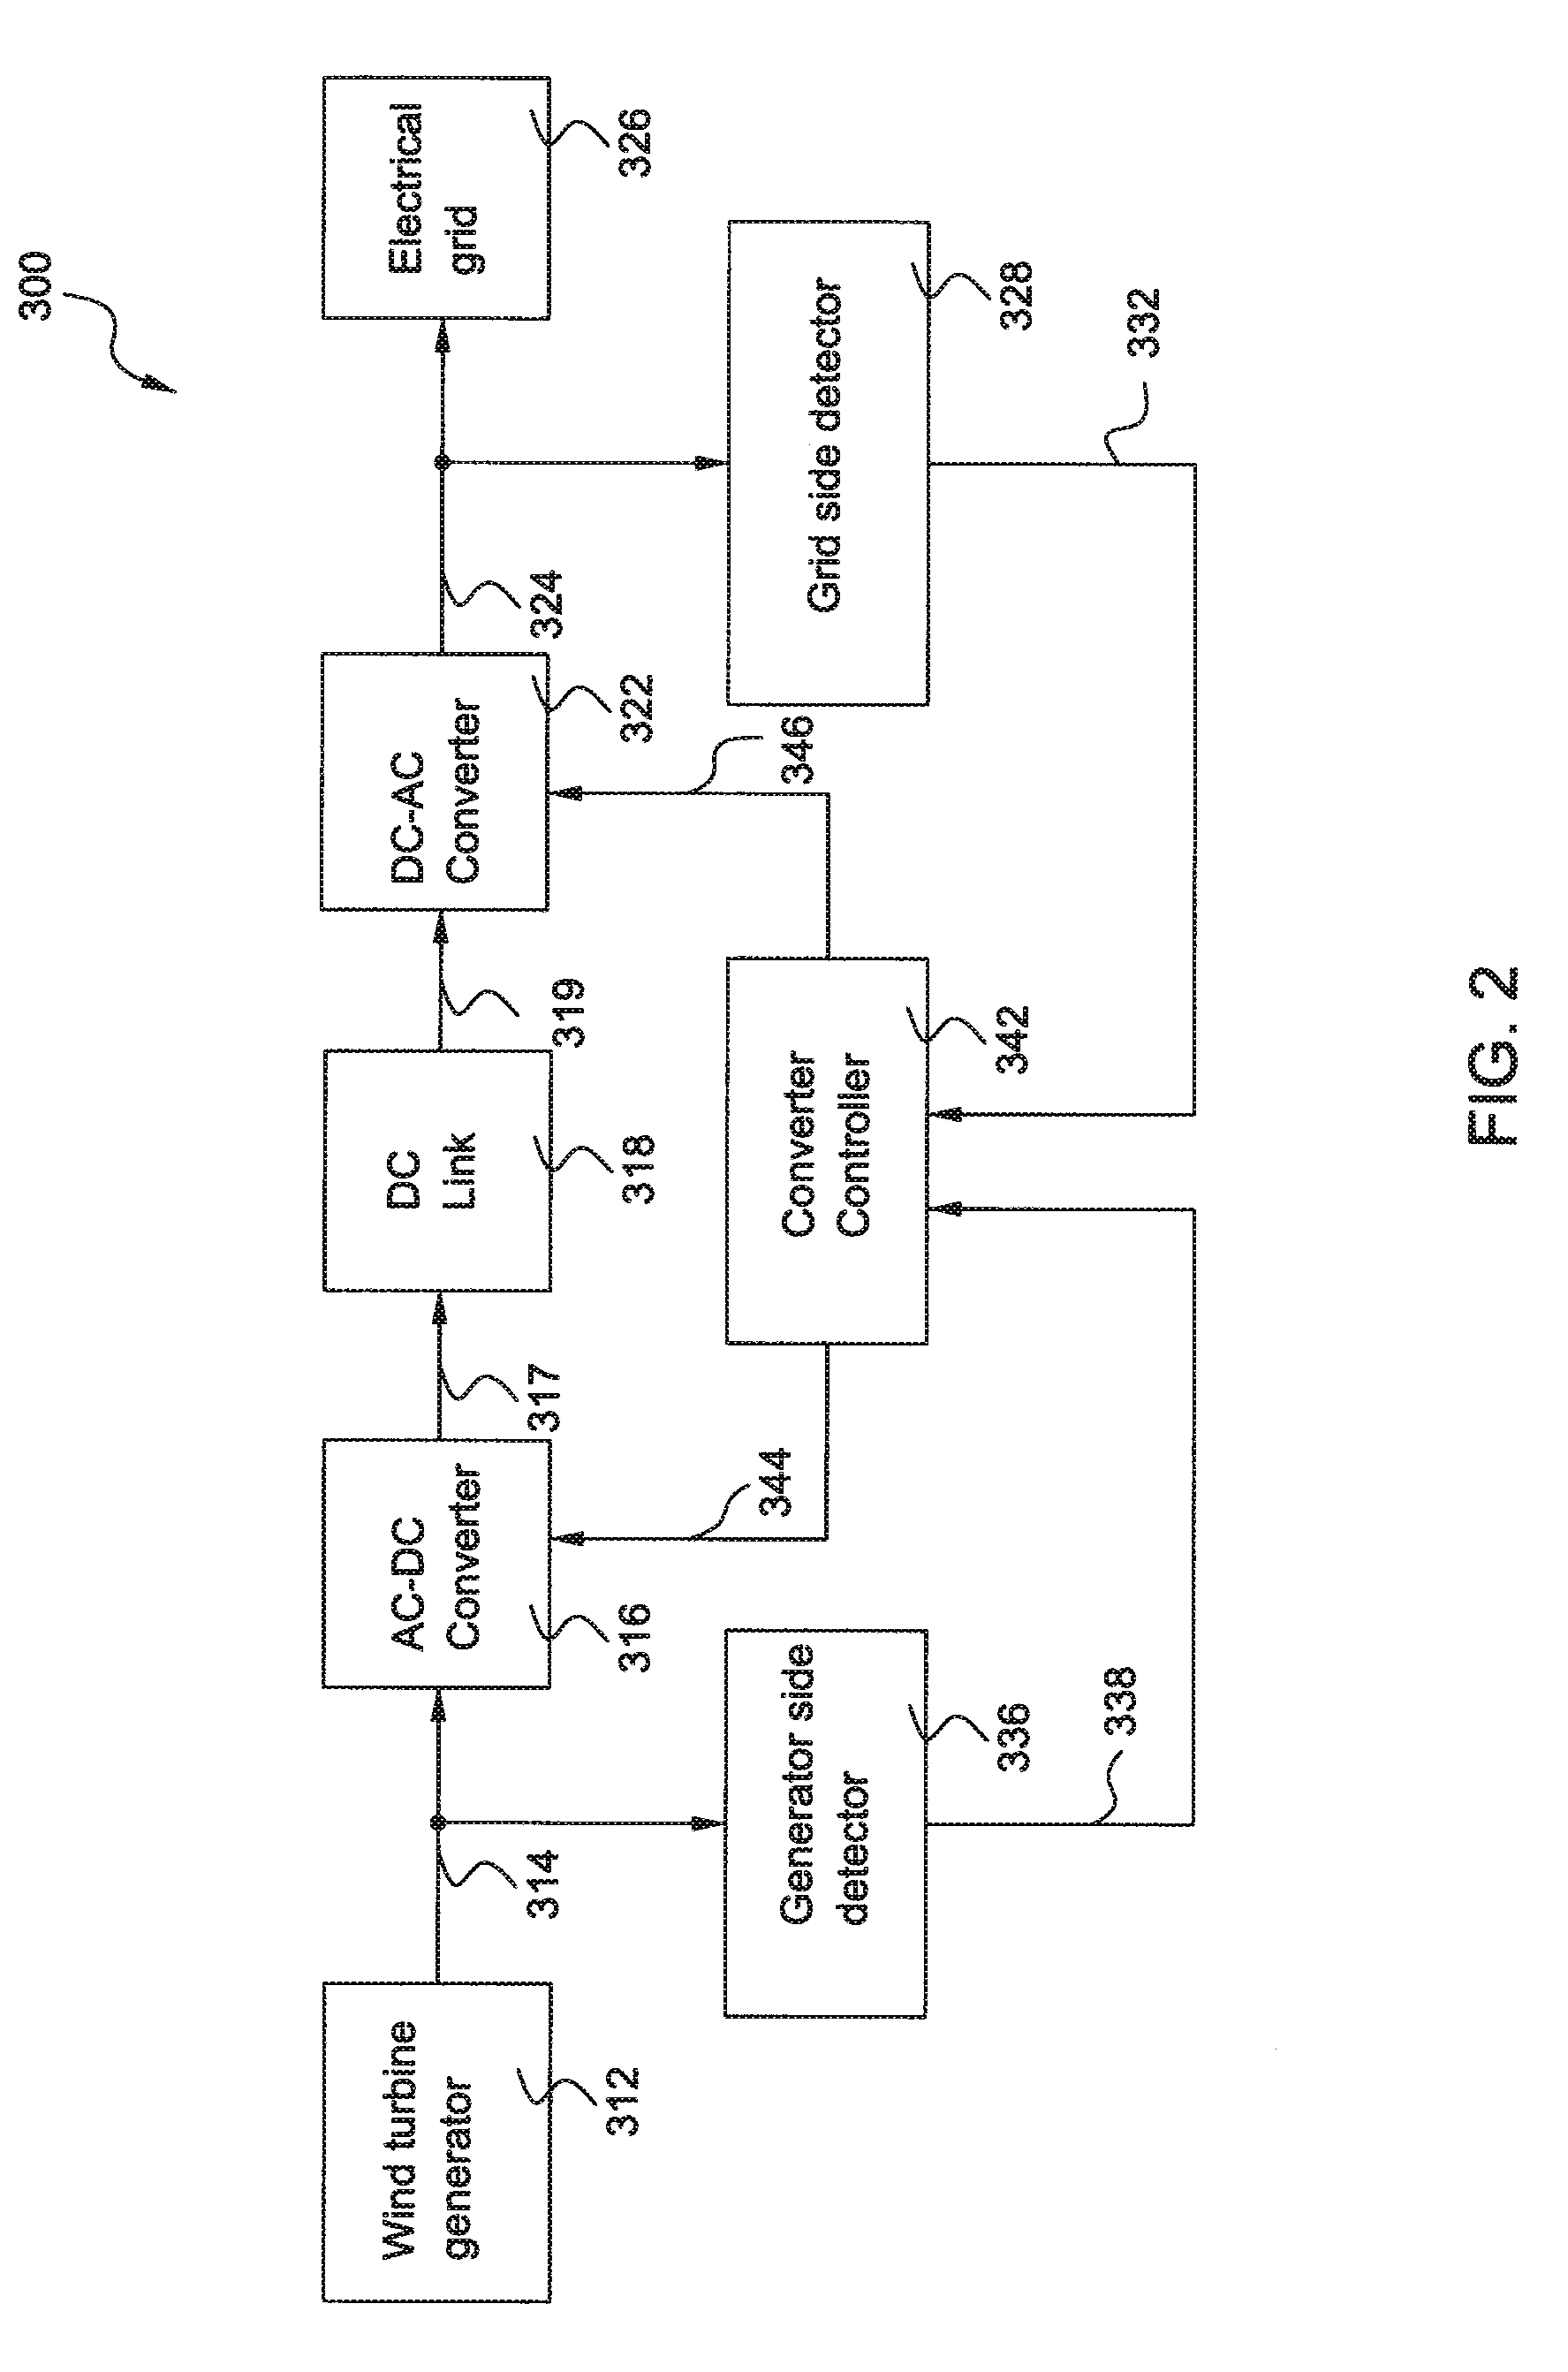 System and method for converter switching frequency control